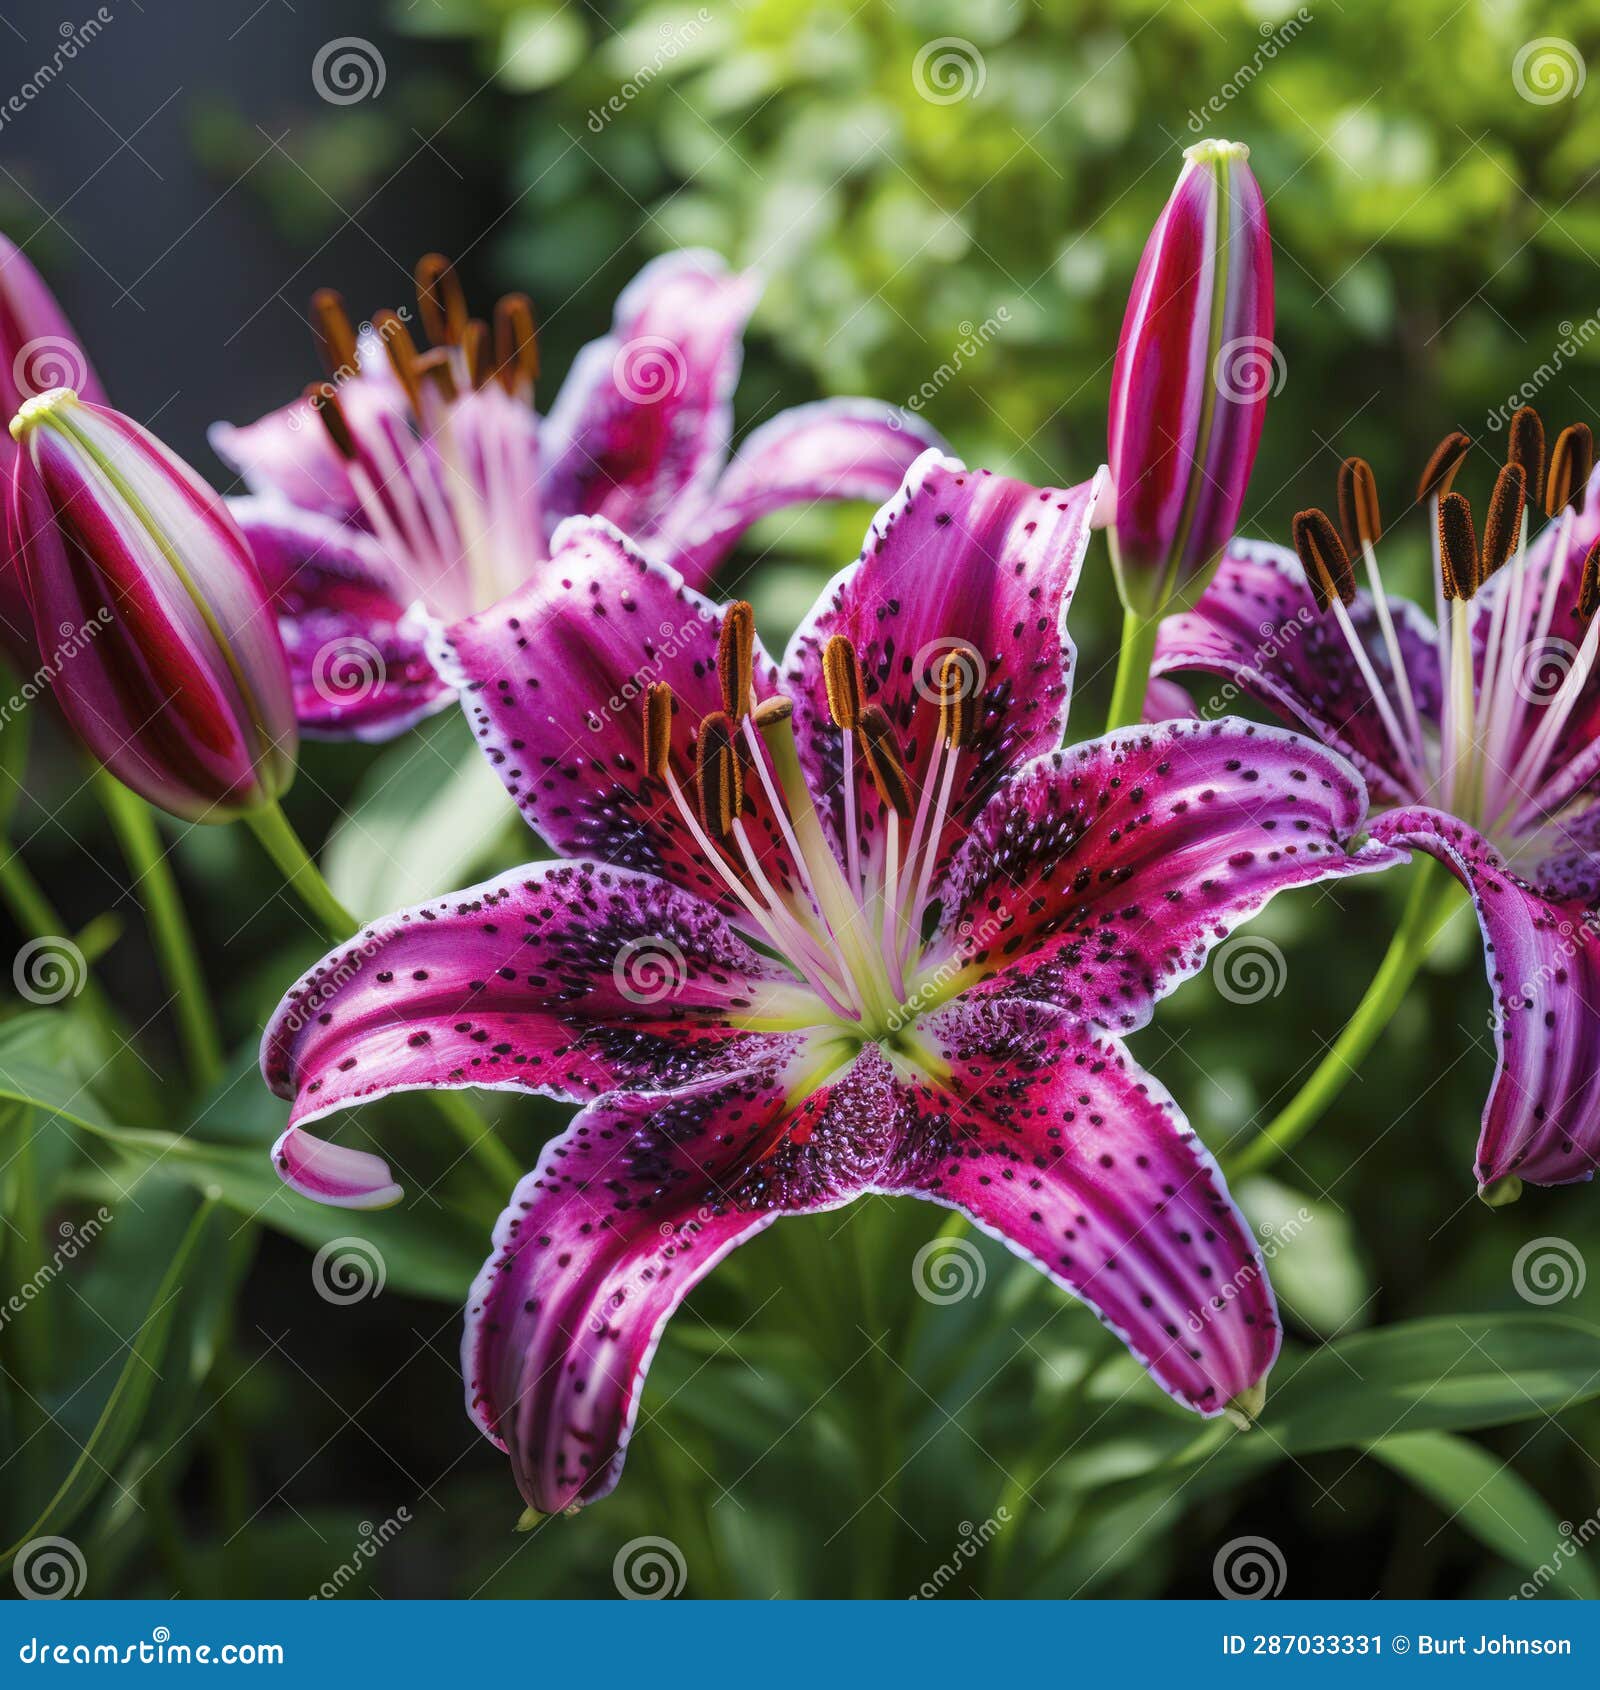 Lifestyle Photo Tiger Lily Flower in a Garden - AI MidJourney Stock ...